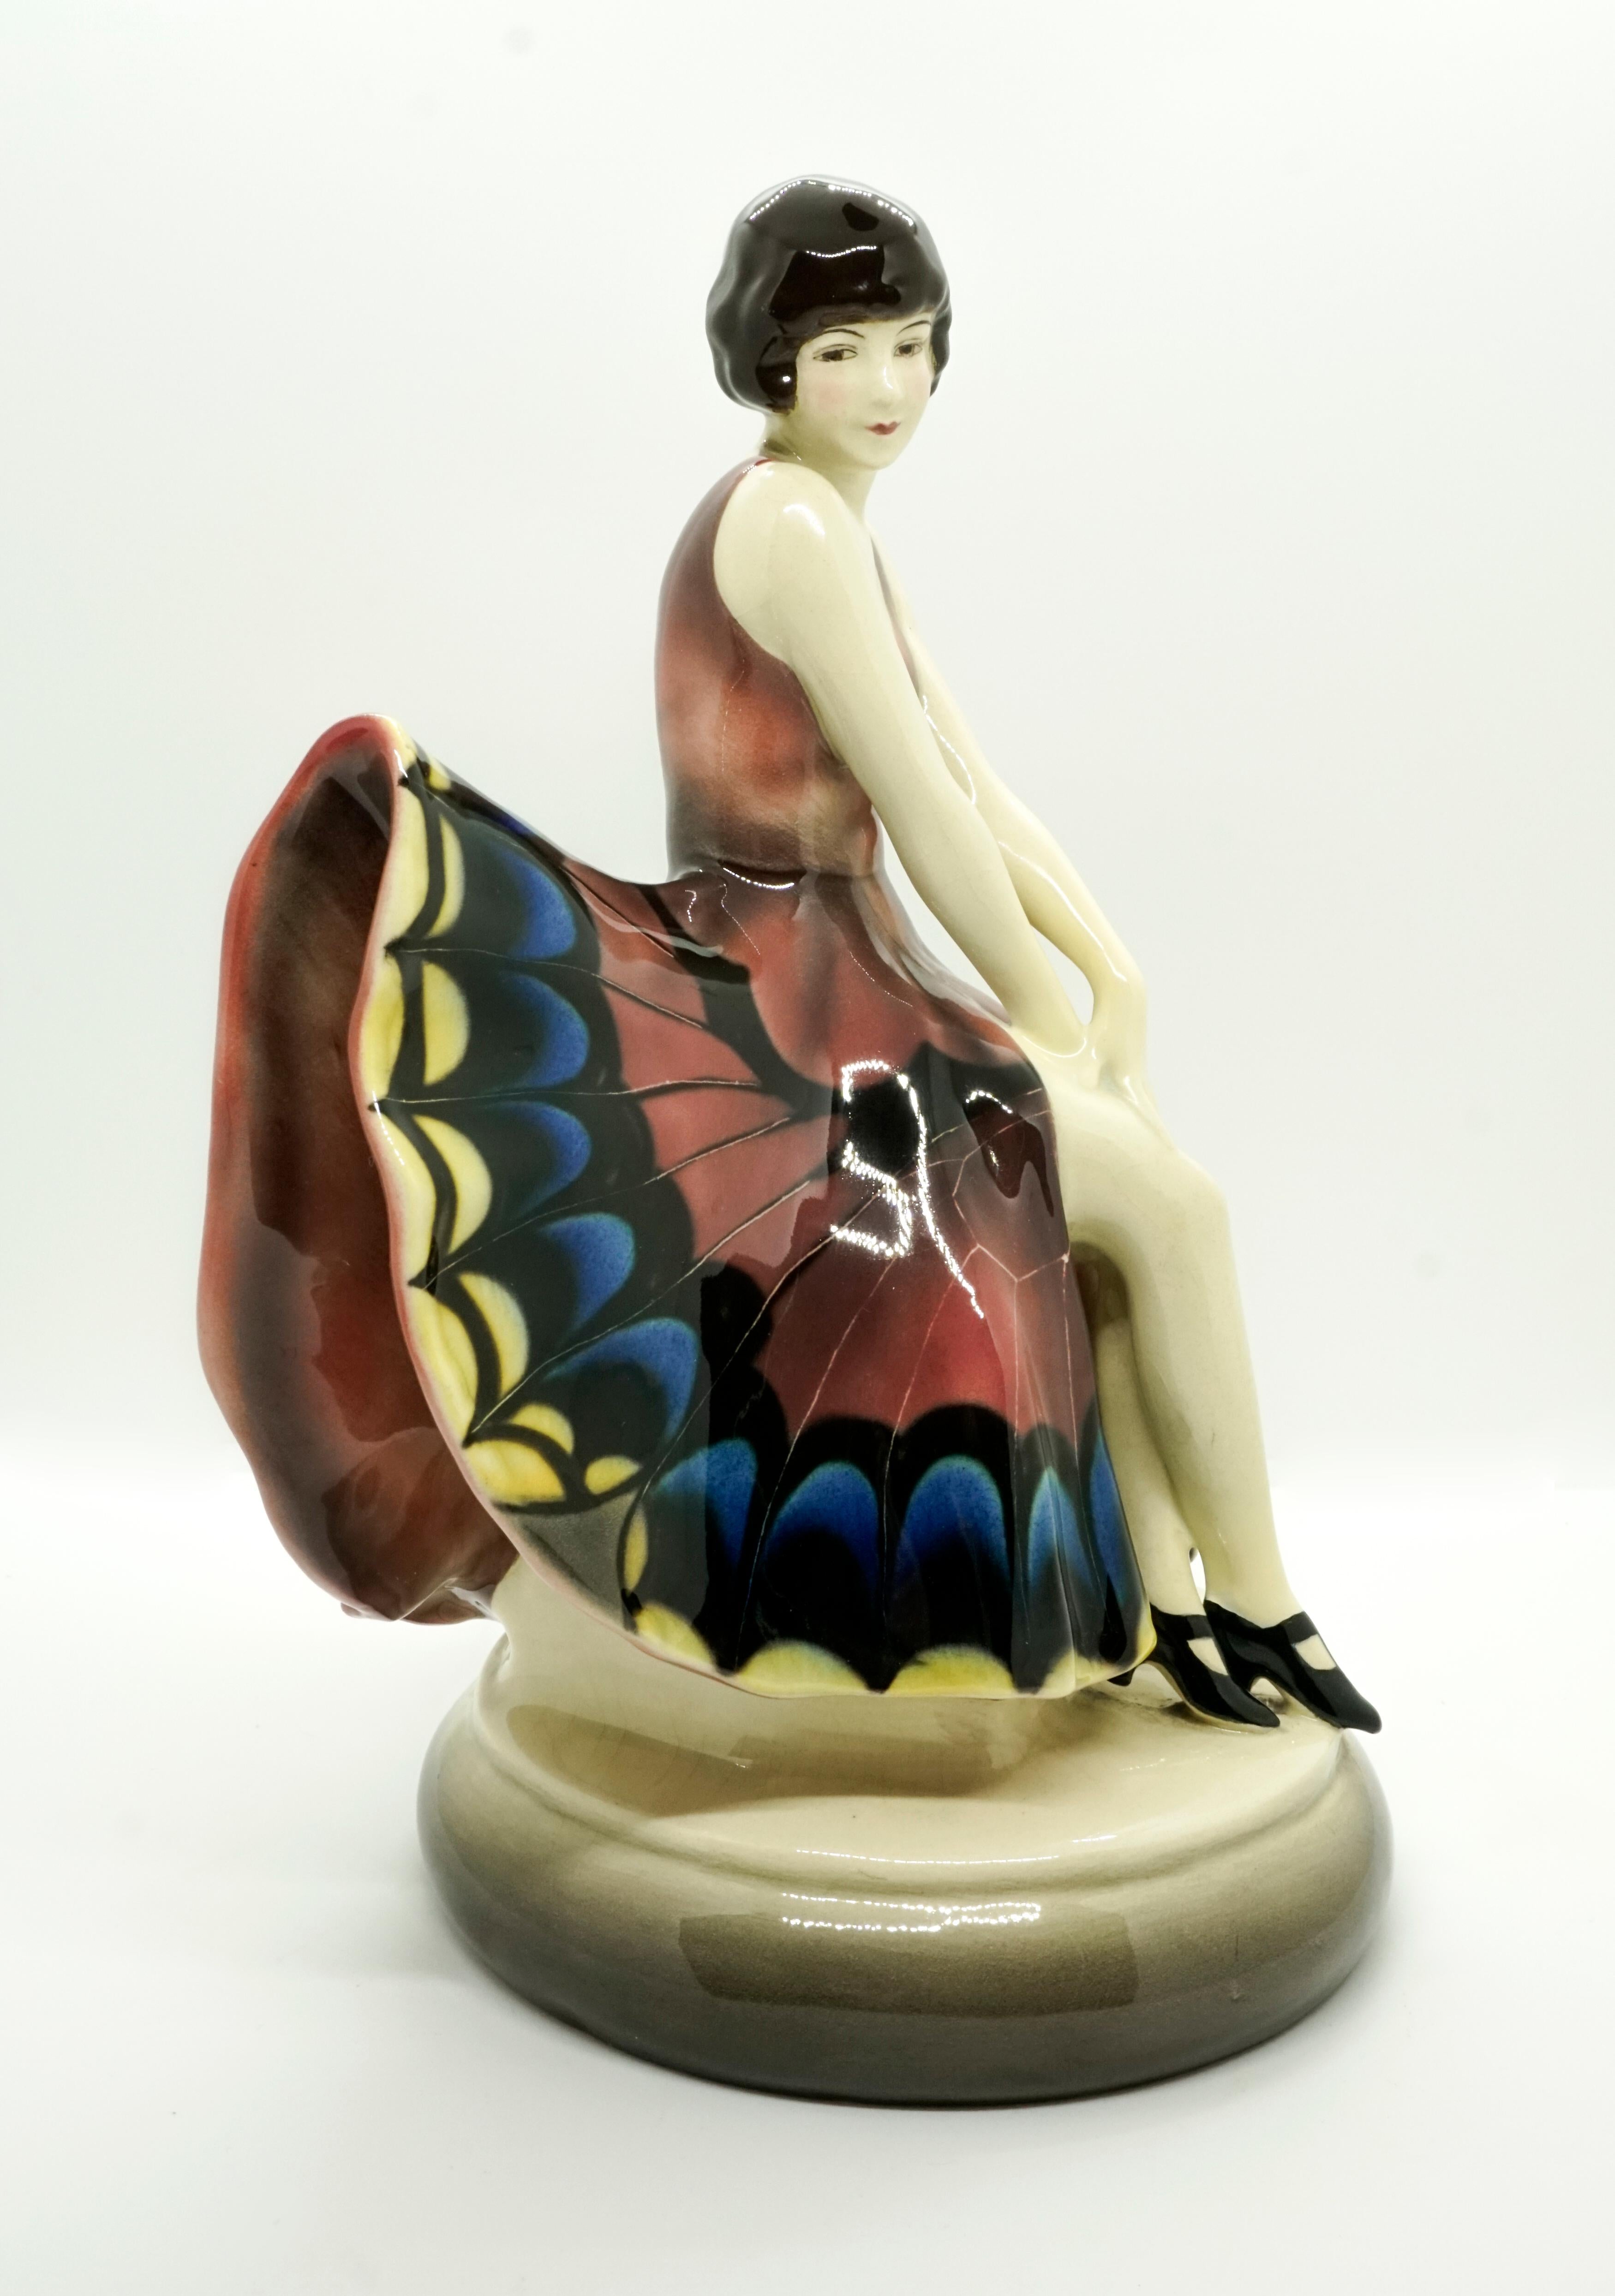 Rare Goldscheider ceramics figure of the 1920s.
The seated dancer wears a single-colored sleeveless top and a matching skirt that protrudes fan-like on both sides, on the front of which a colorful pattern is unfolded, which is modeled on butterfly